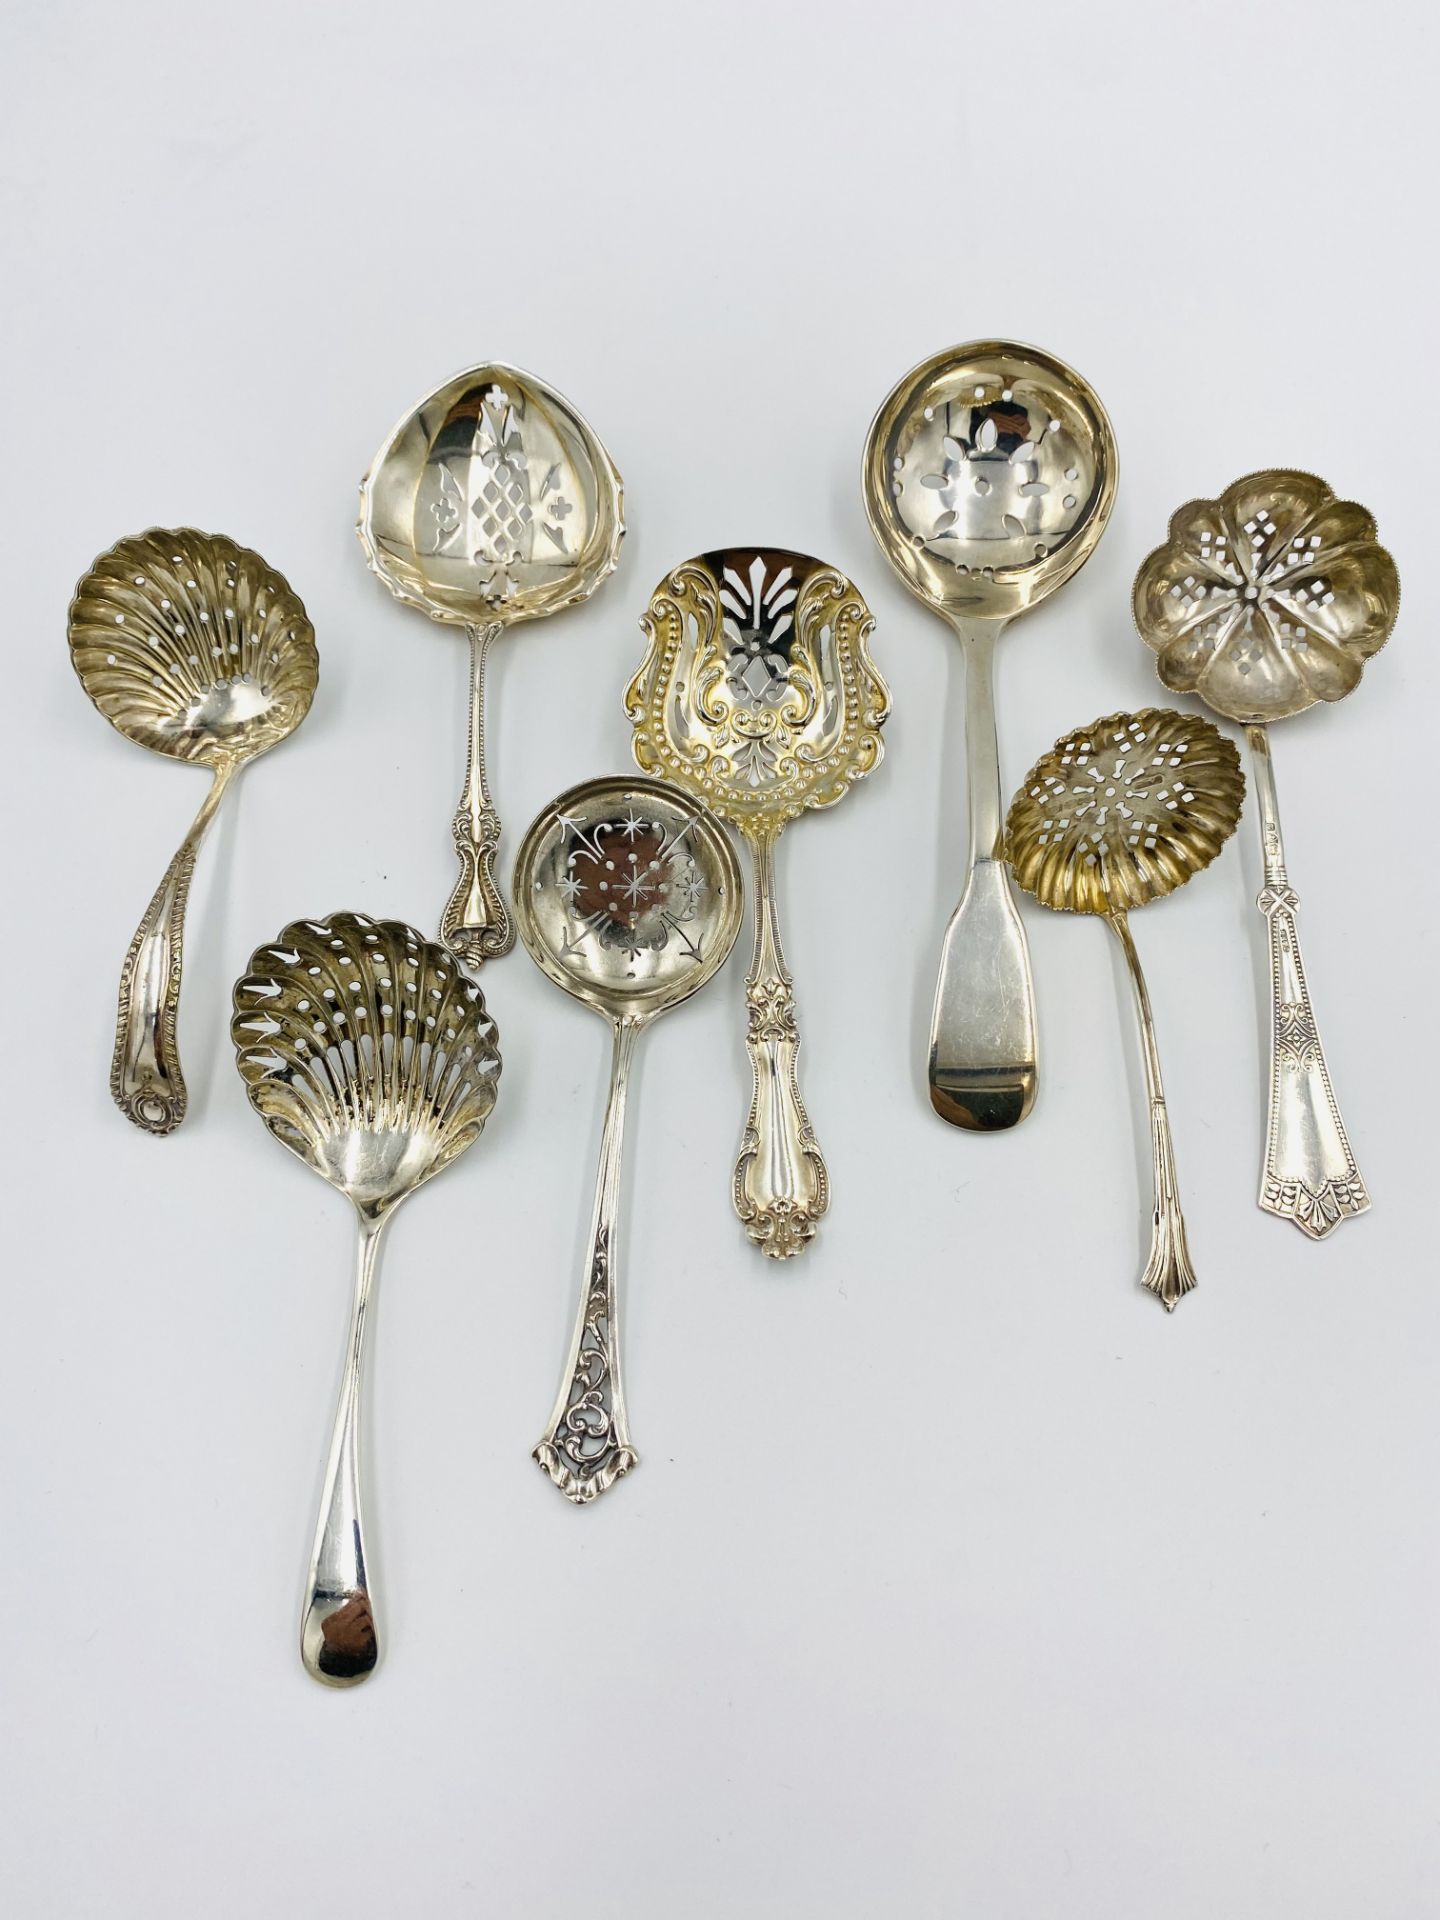 A collection of silver sugar sifters and a silver plated sugar sifter